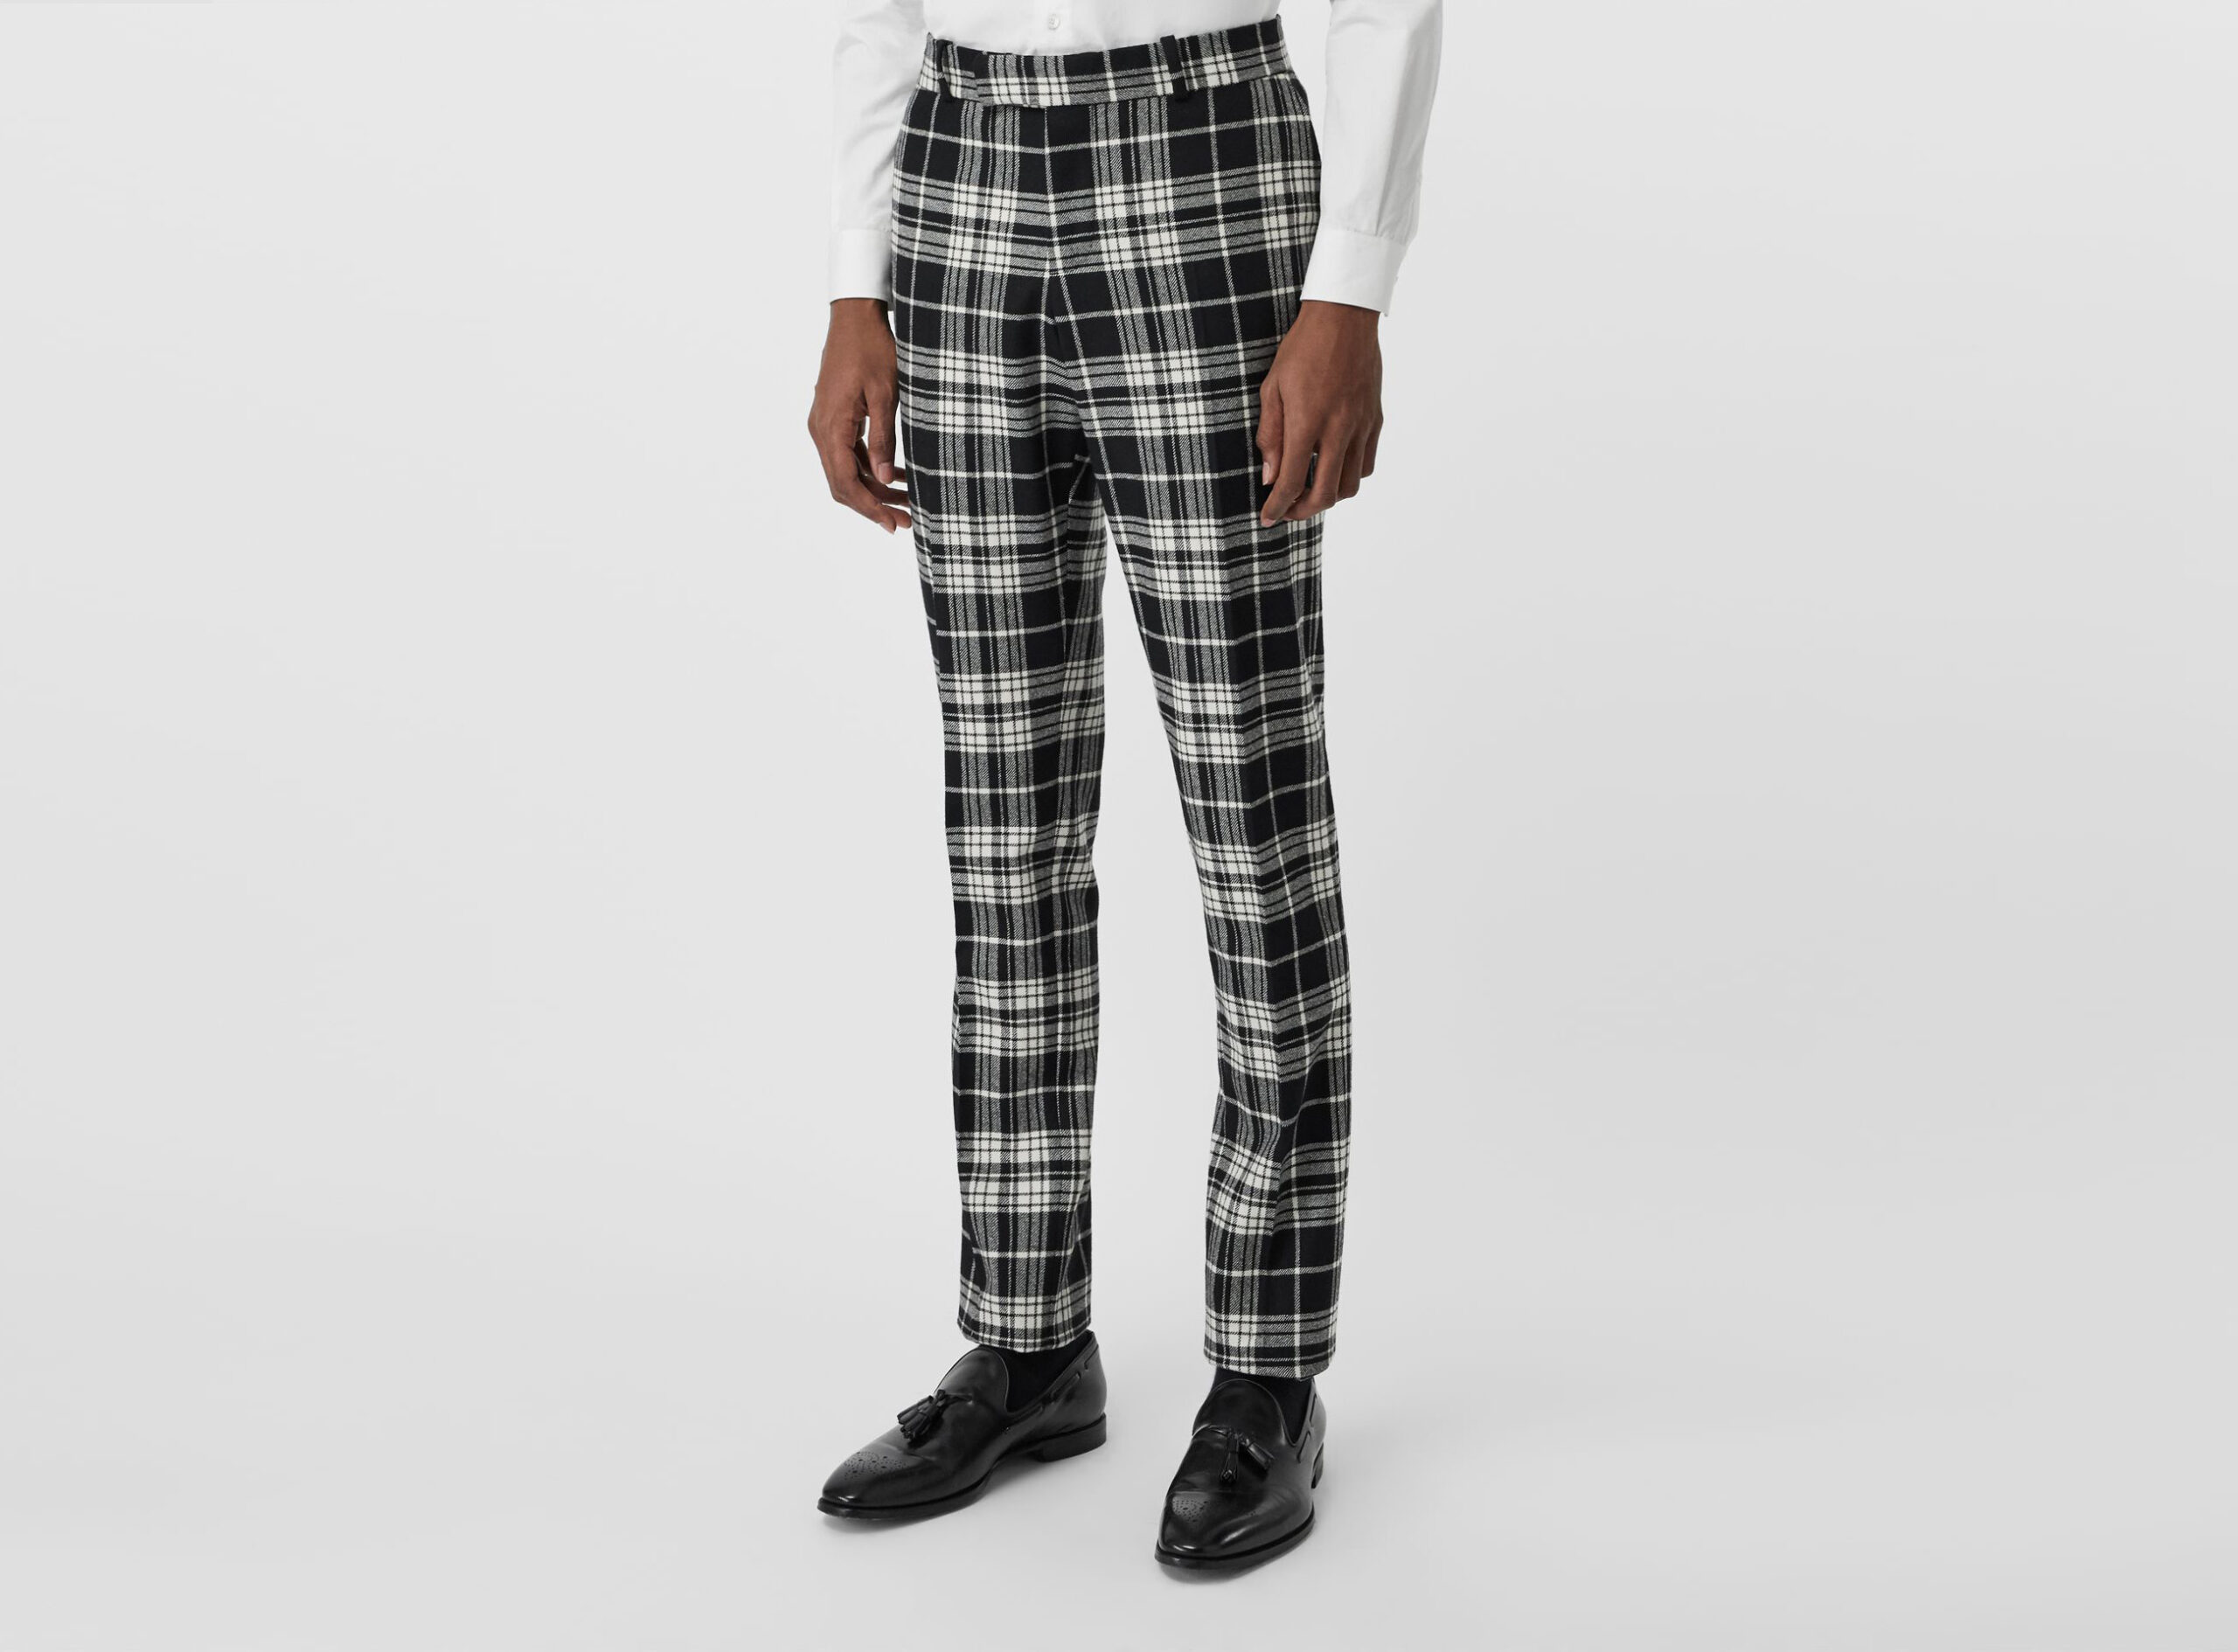 What to wear with tartan trousers